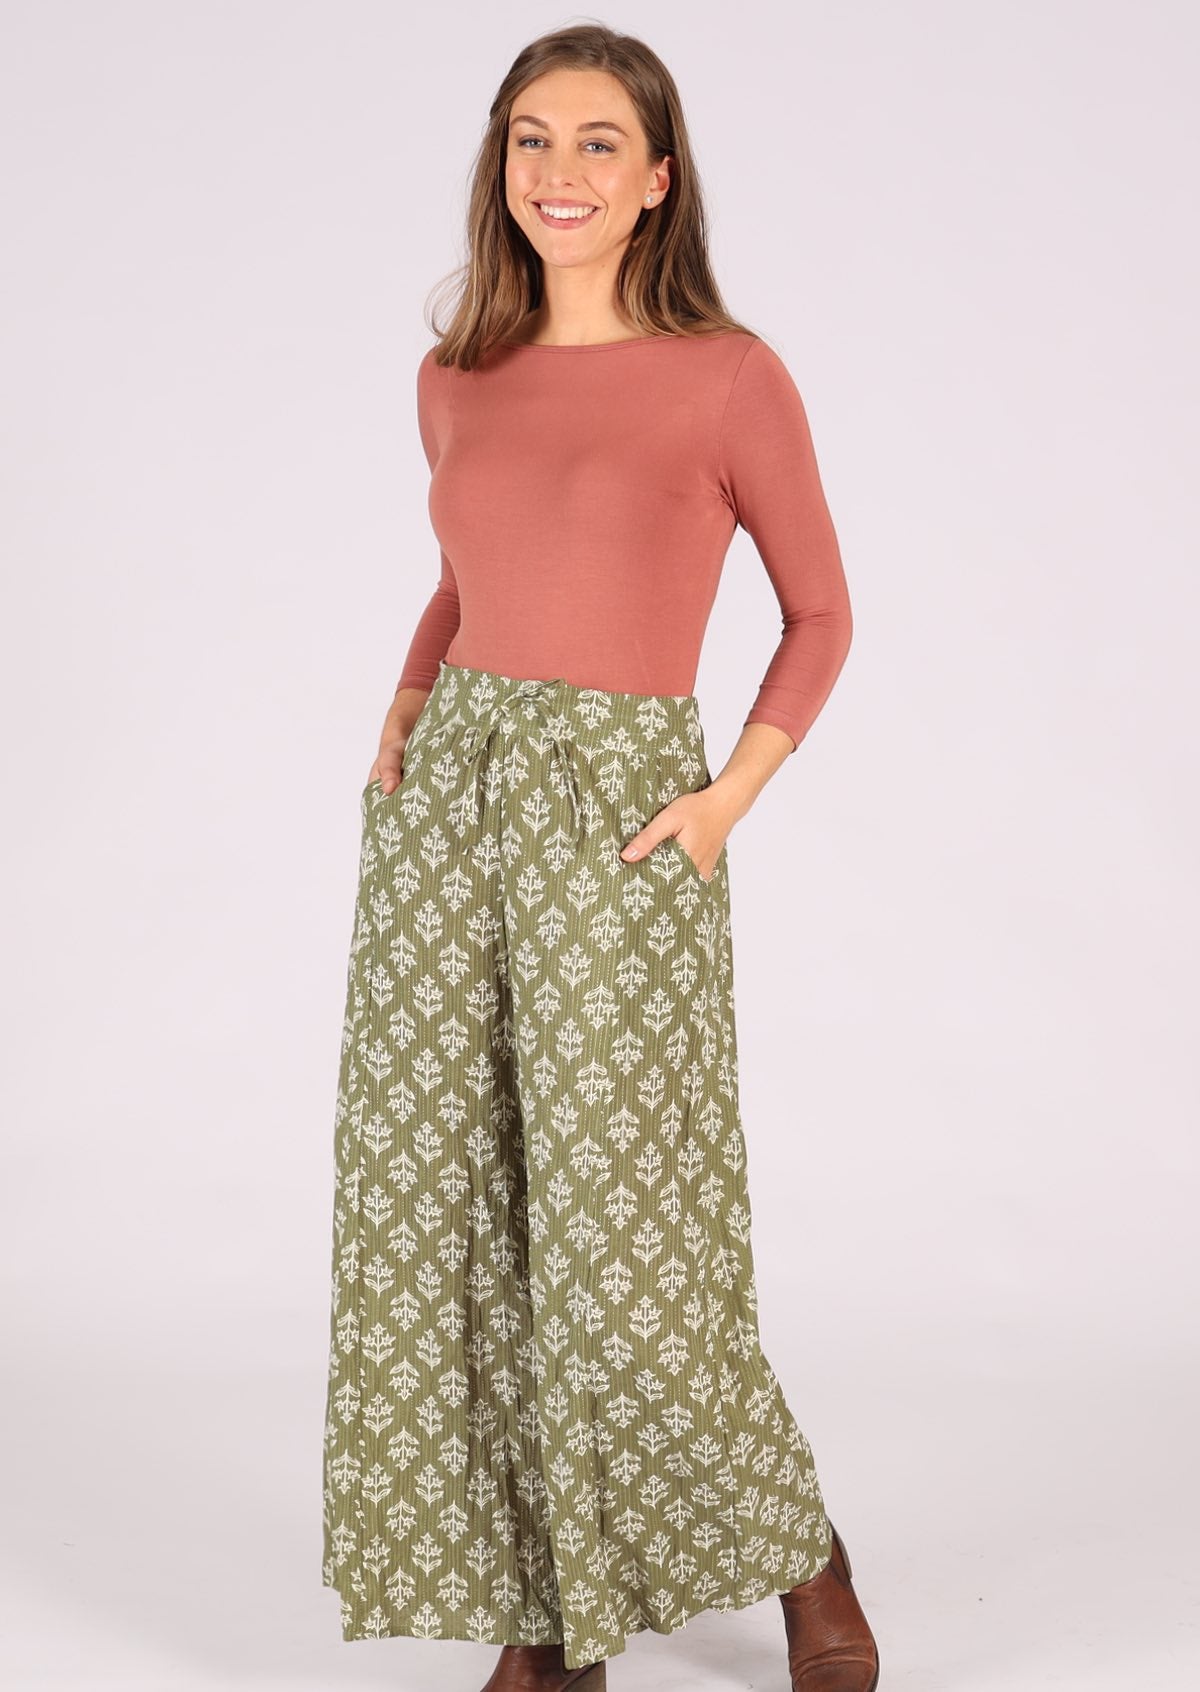 Wide leg pants with pockets and elasticised back of waistband for comfort